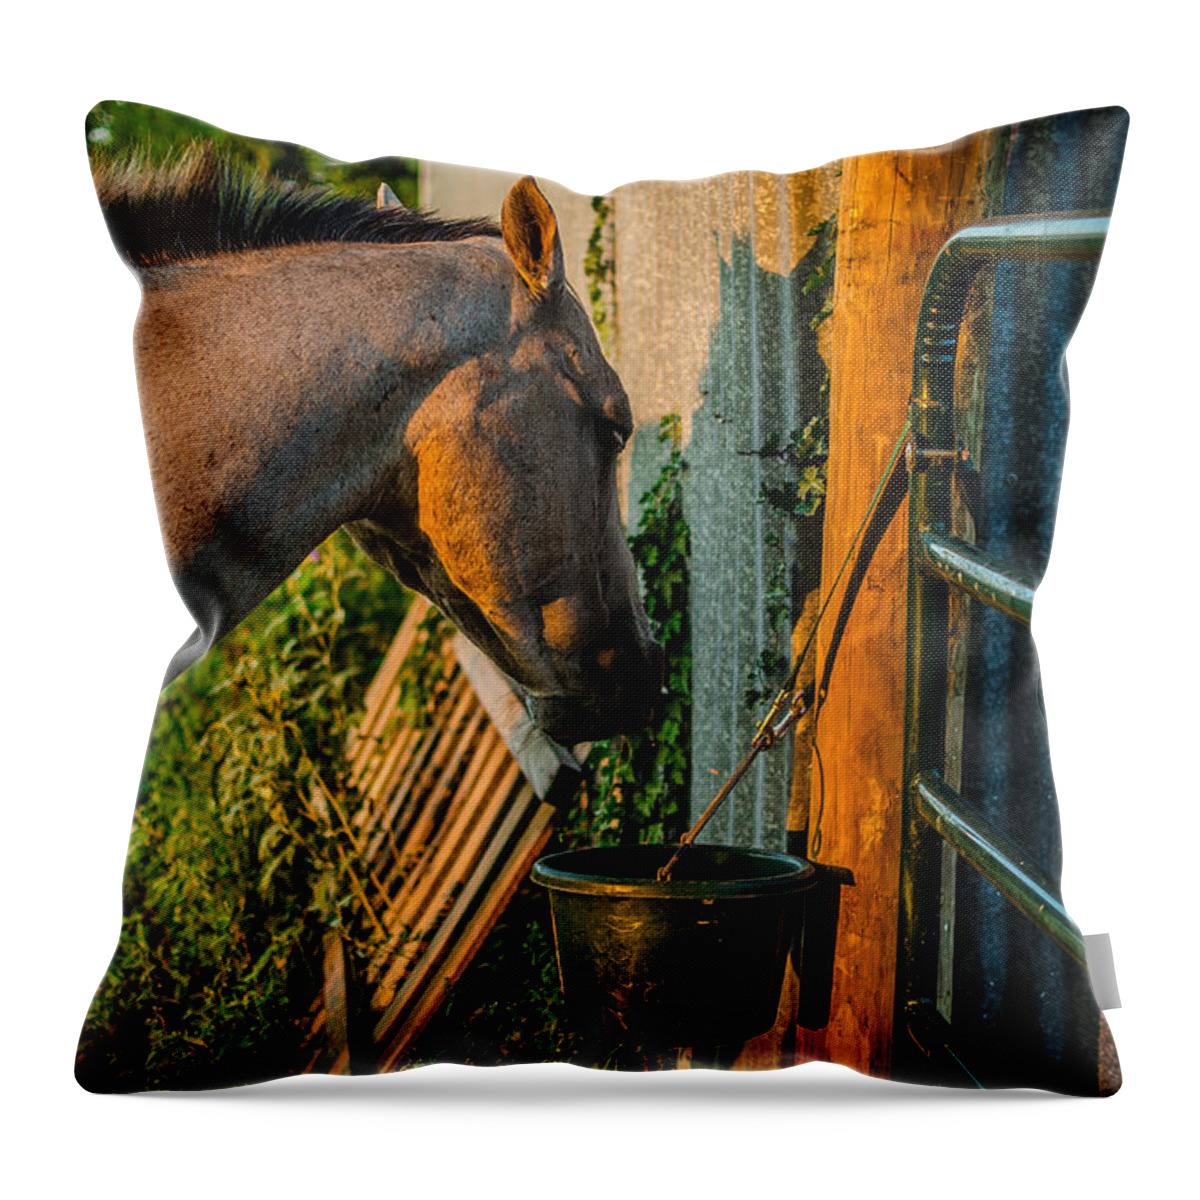 Horse Throw Pillow featuring the photograph Dinnertime Abendessen by David Morefield